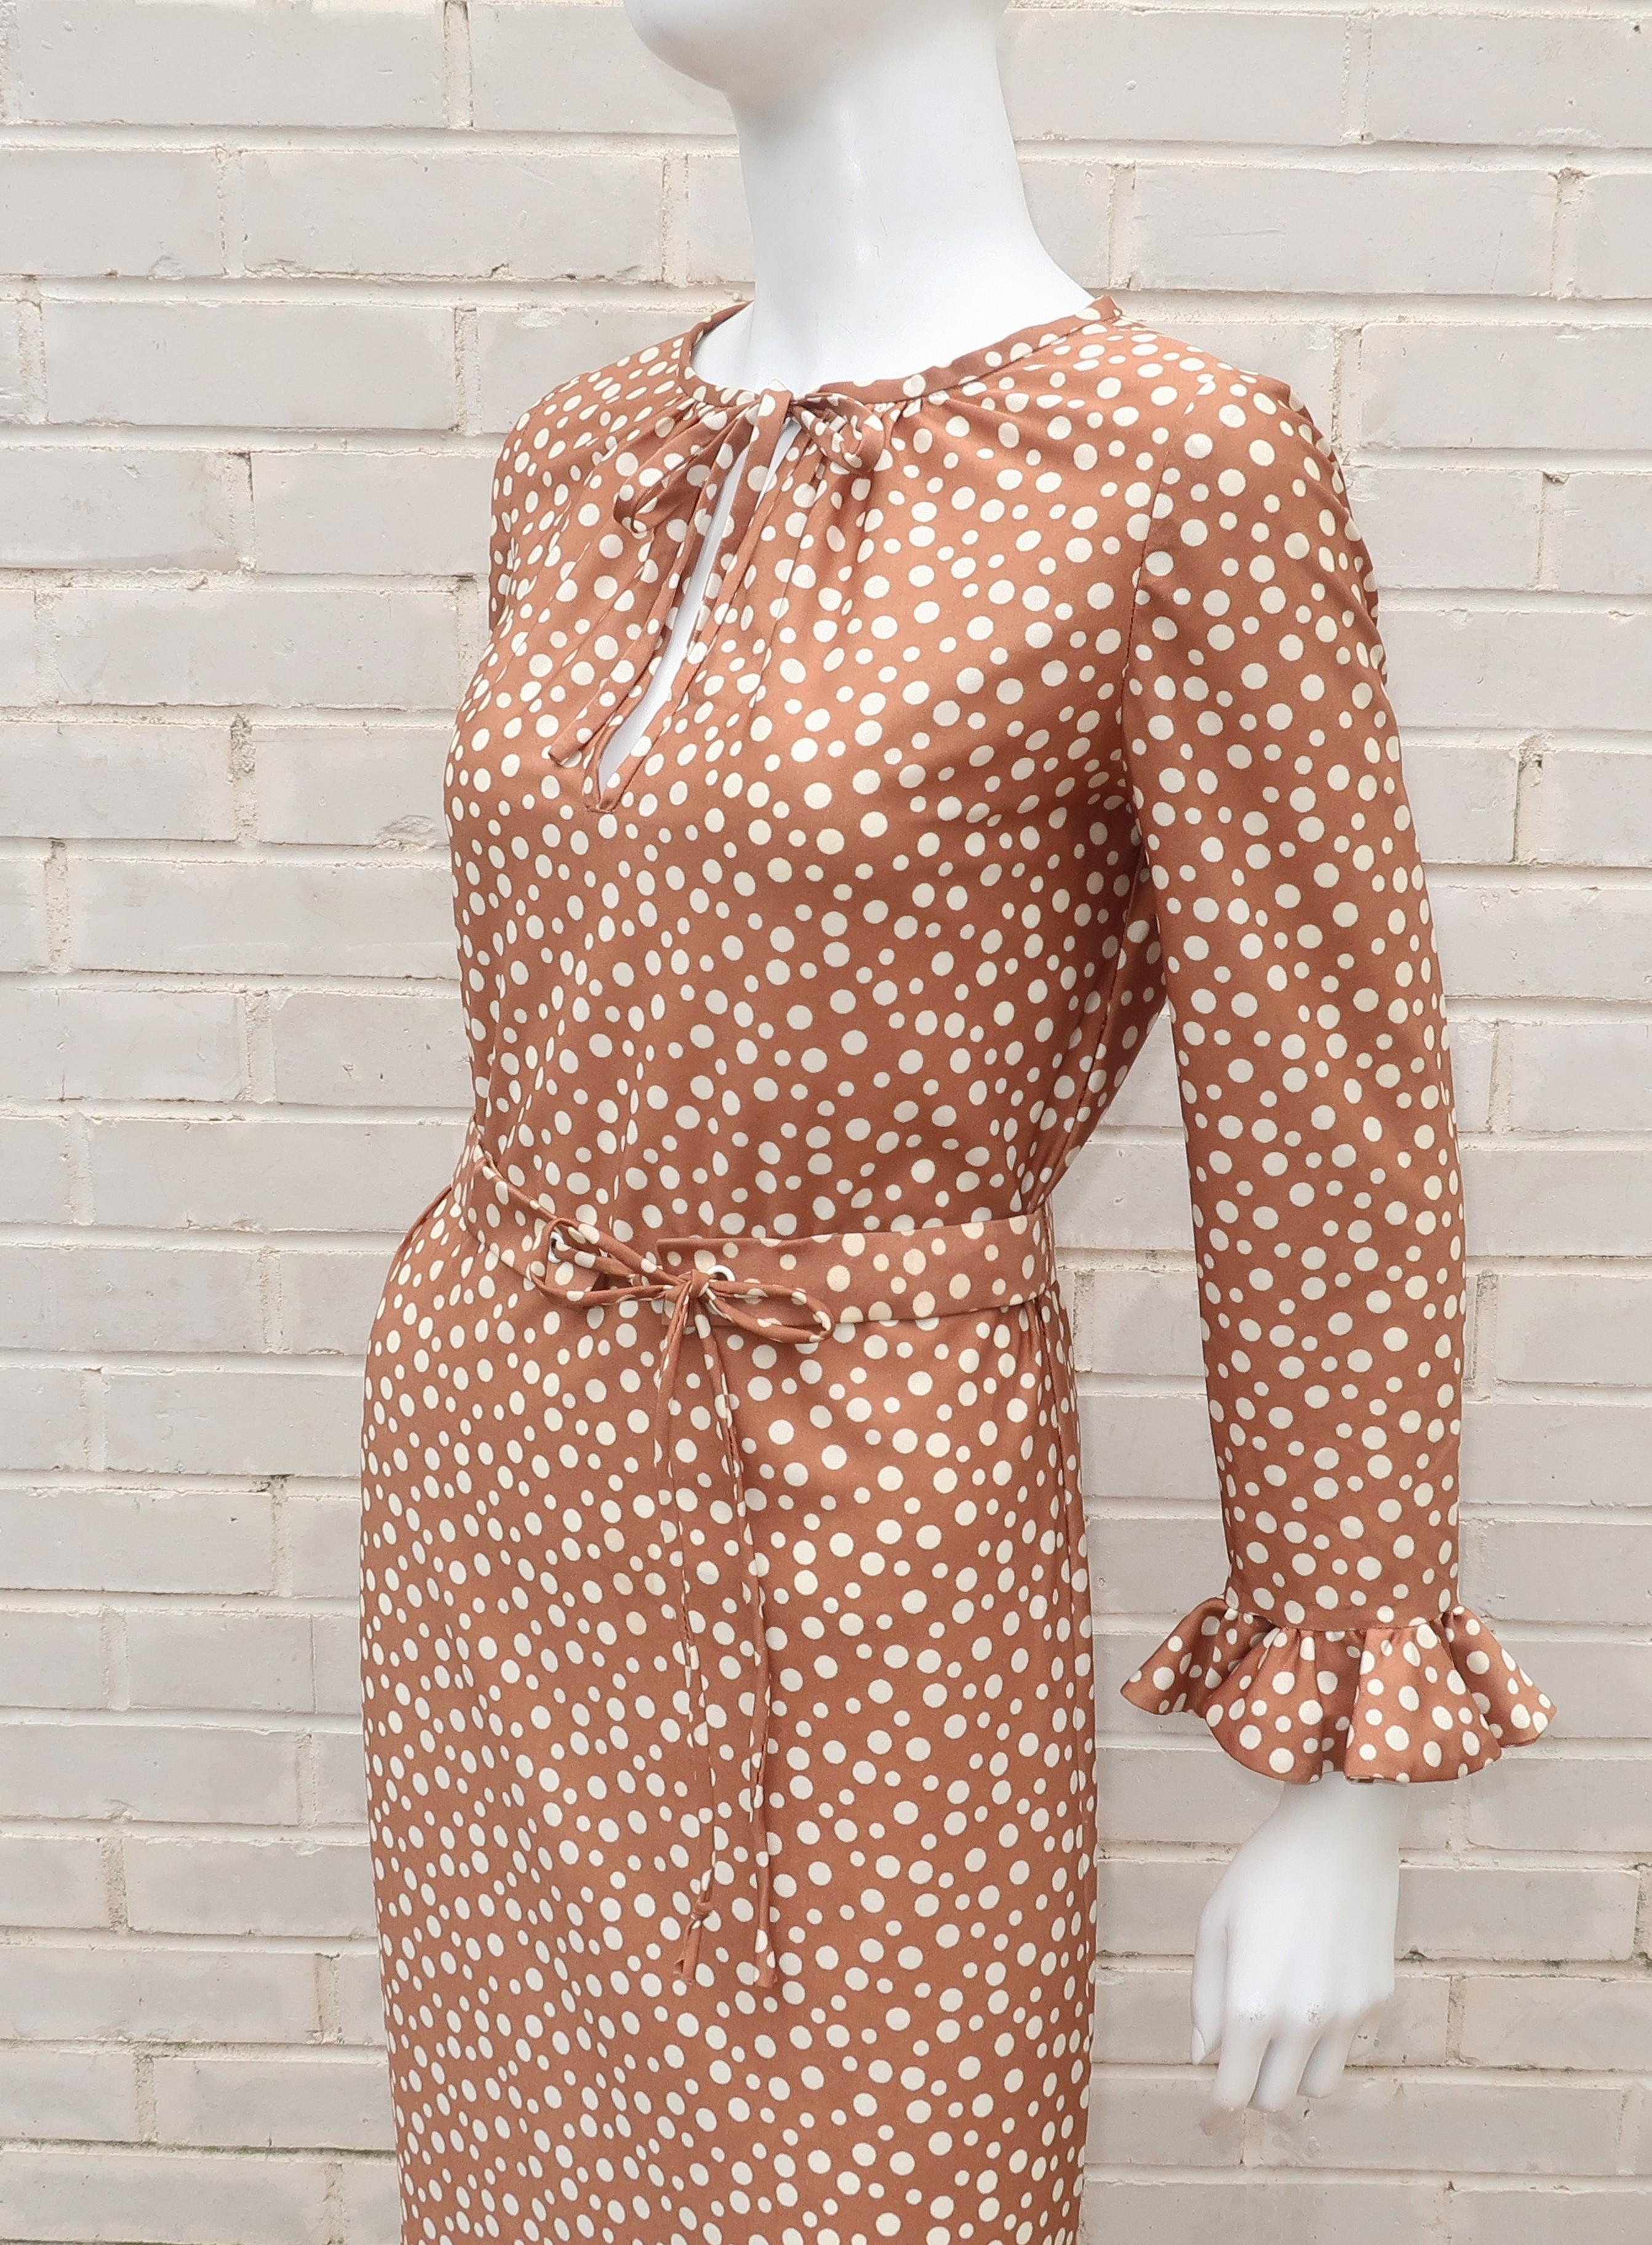 This C.1970 Jane Andre pullover dress offers an easy silhouette with stylish details.  The polyester jersey fabric has the weight and feel of silk providing comfort perfect for day wear that can be dressed up or down depending on the occasion.  The